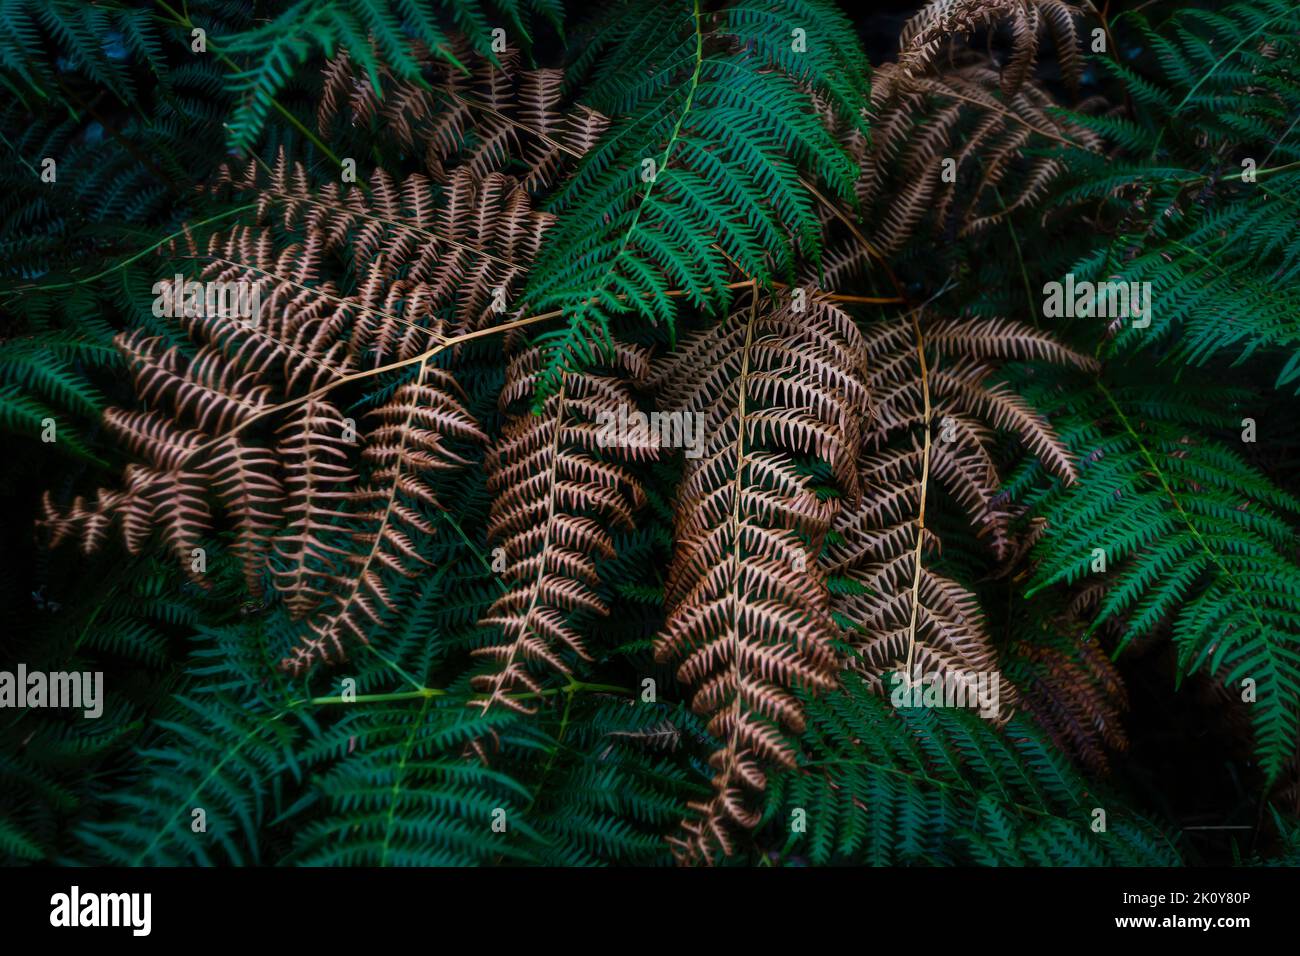 Brown fern leaf surrounded by green ones. Dark and moody nature abstract. Stock Photo